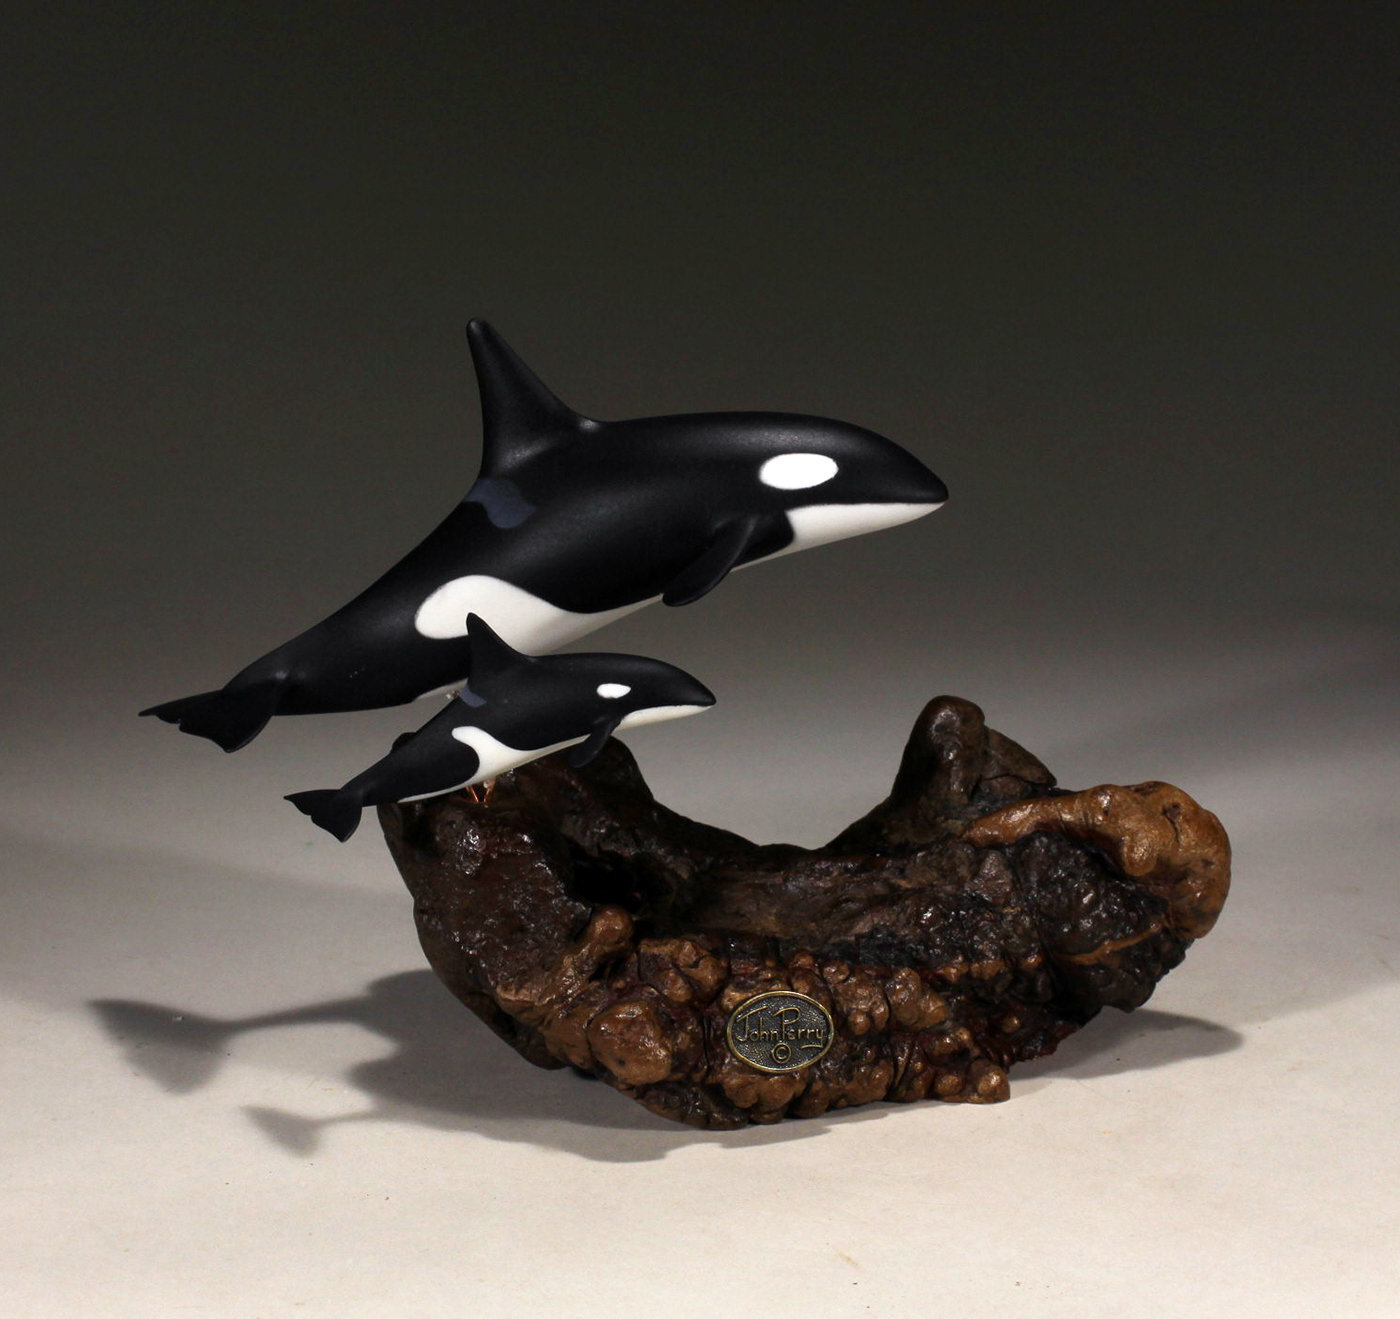 Orca Killer Whale Duo by John Perry 5in long Smaller version Sculpture 